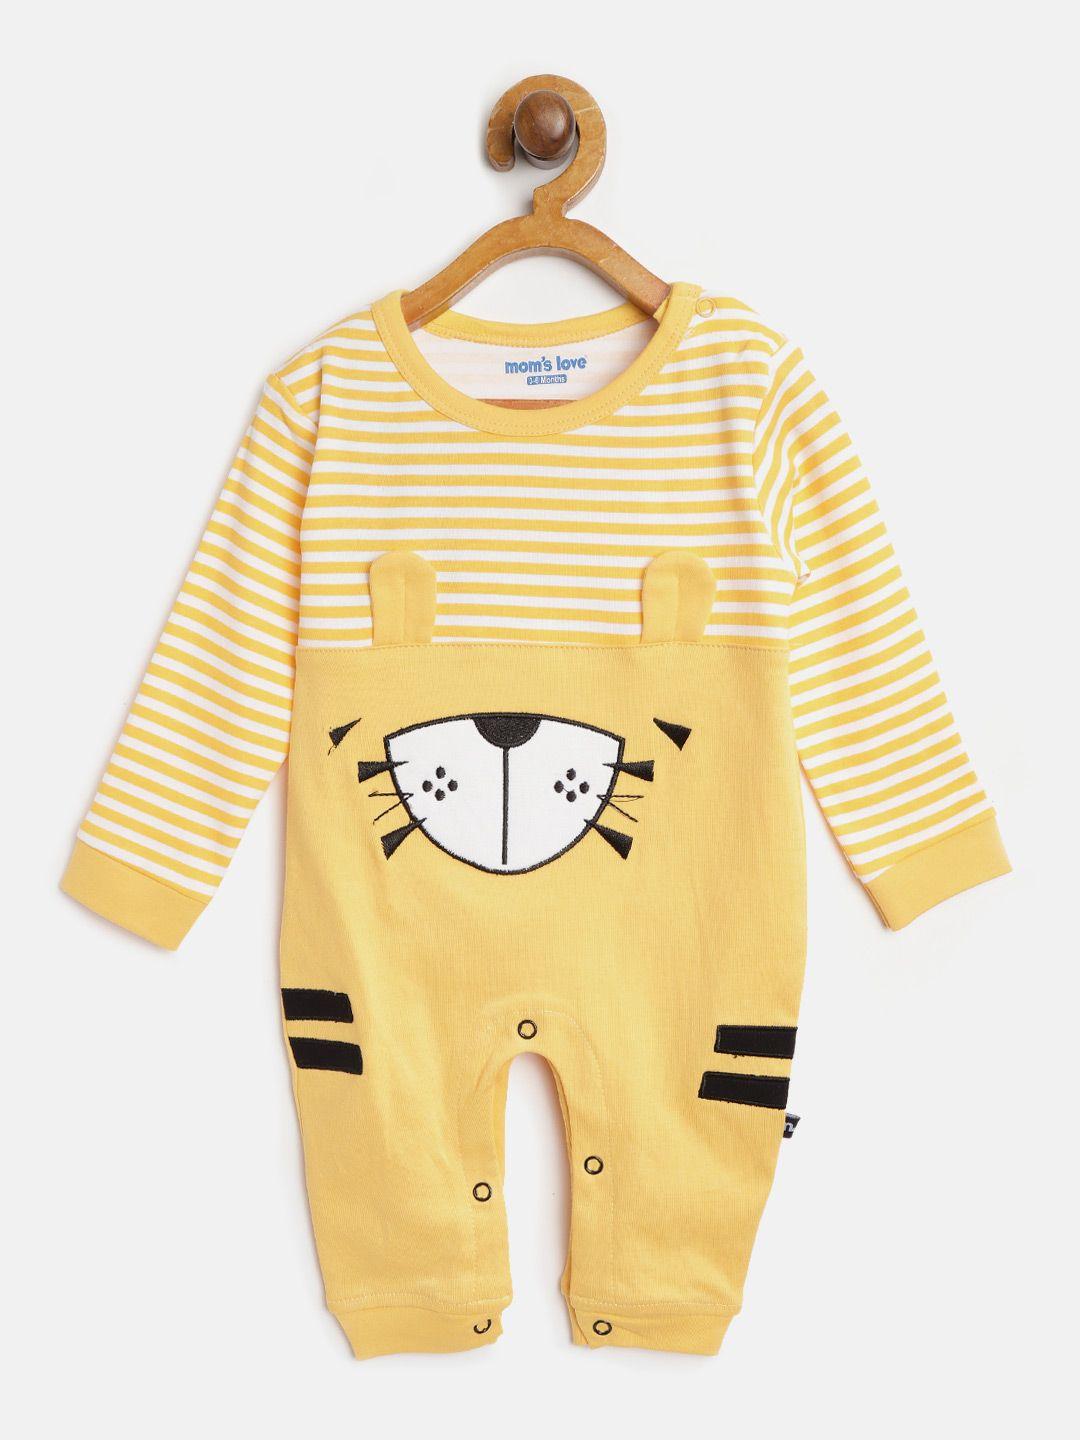 moms love boys white & yellow striped rompers with applique detail